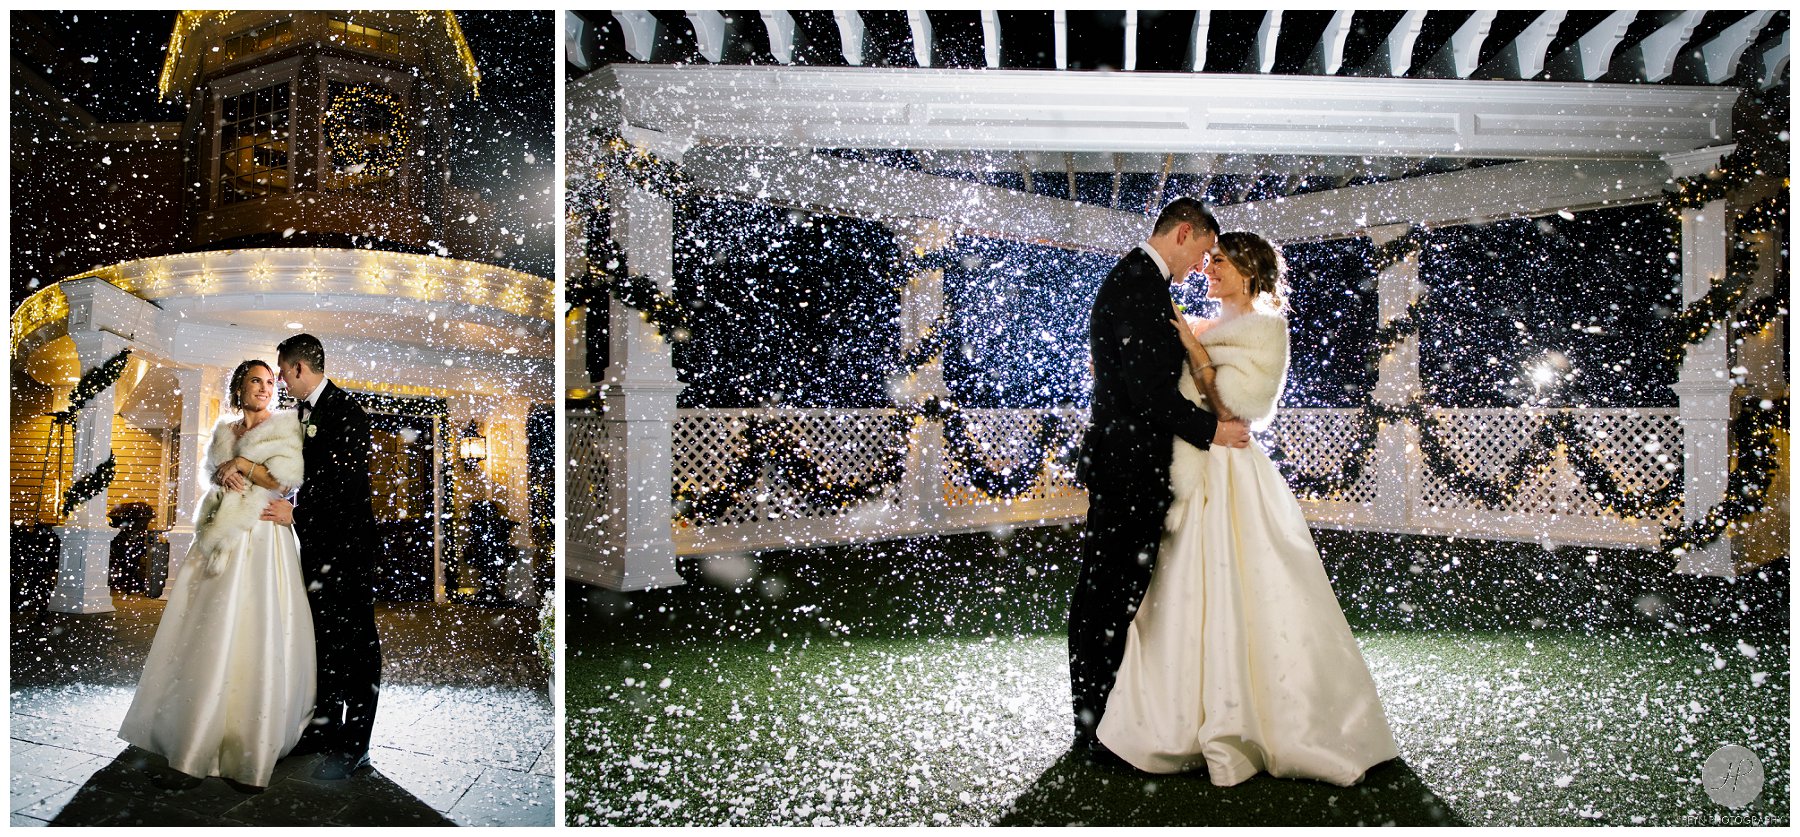 outdoor night photos of bride and groom in the snow at clarks landing yacht club wedding